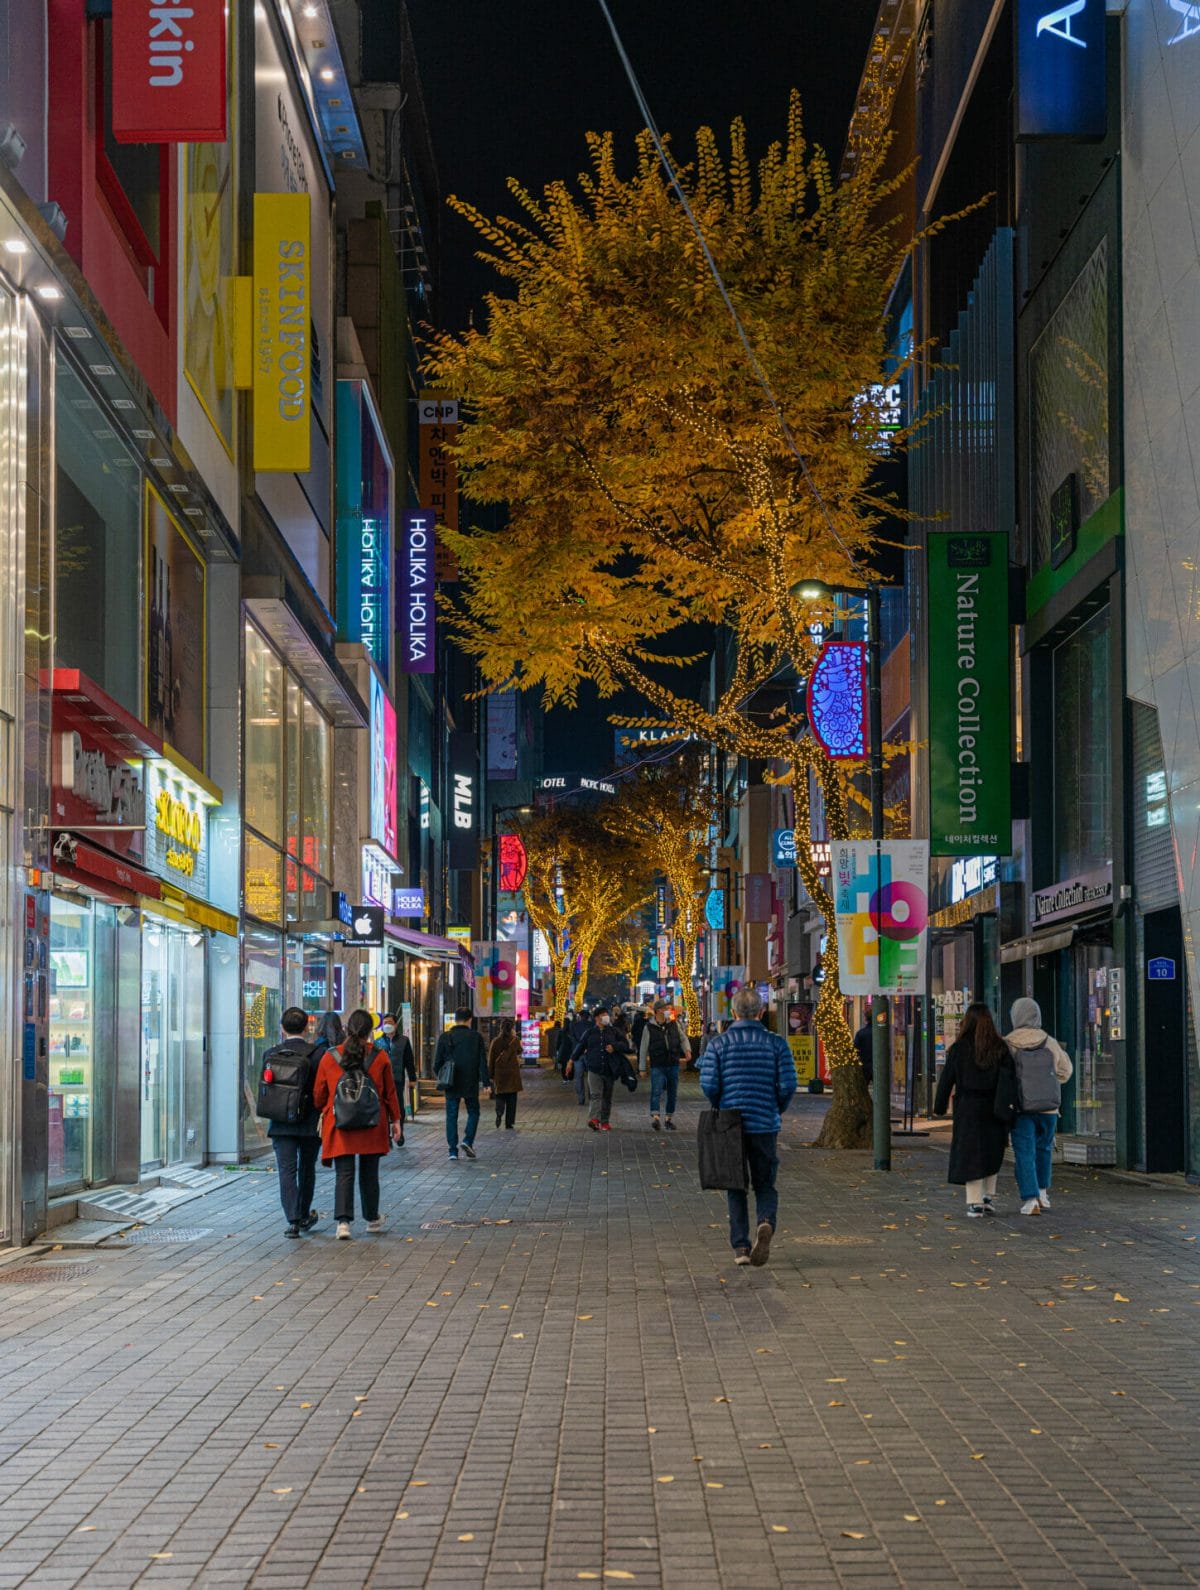 Seoul at Night - Best Views, Activities, Areas and More 30